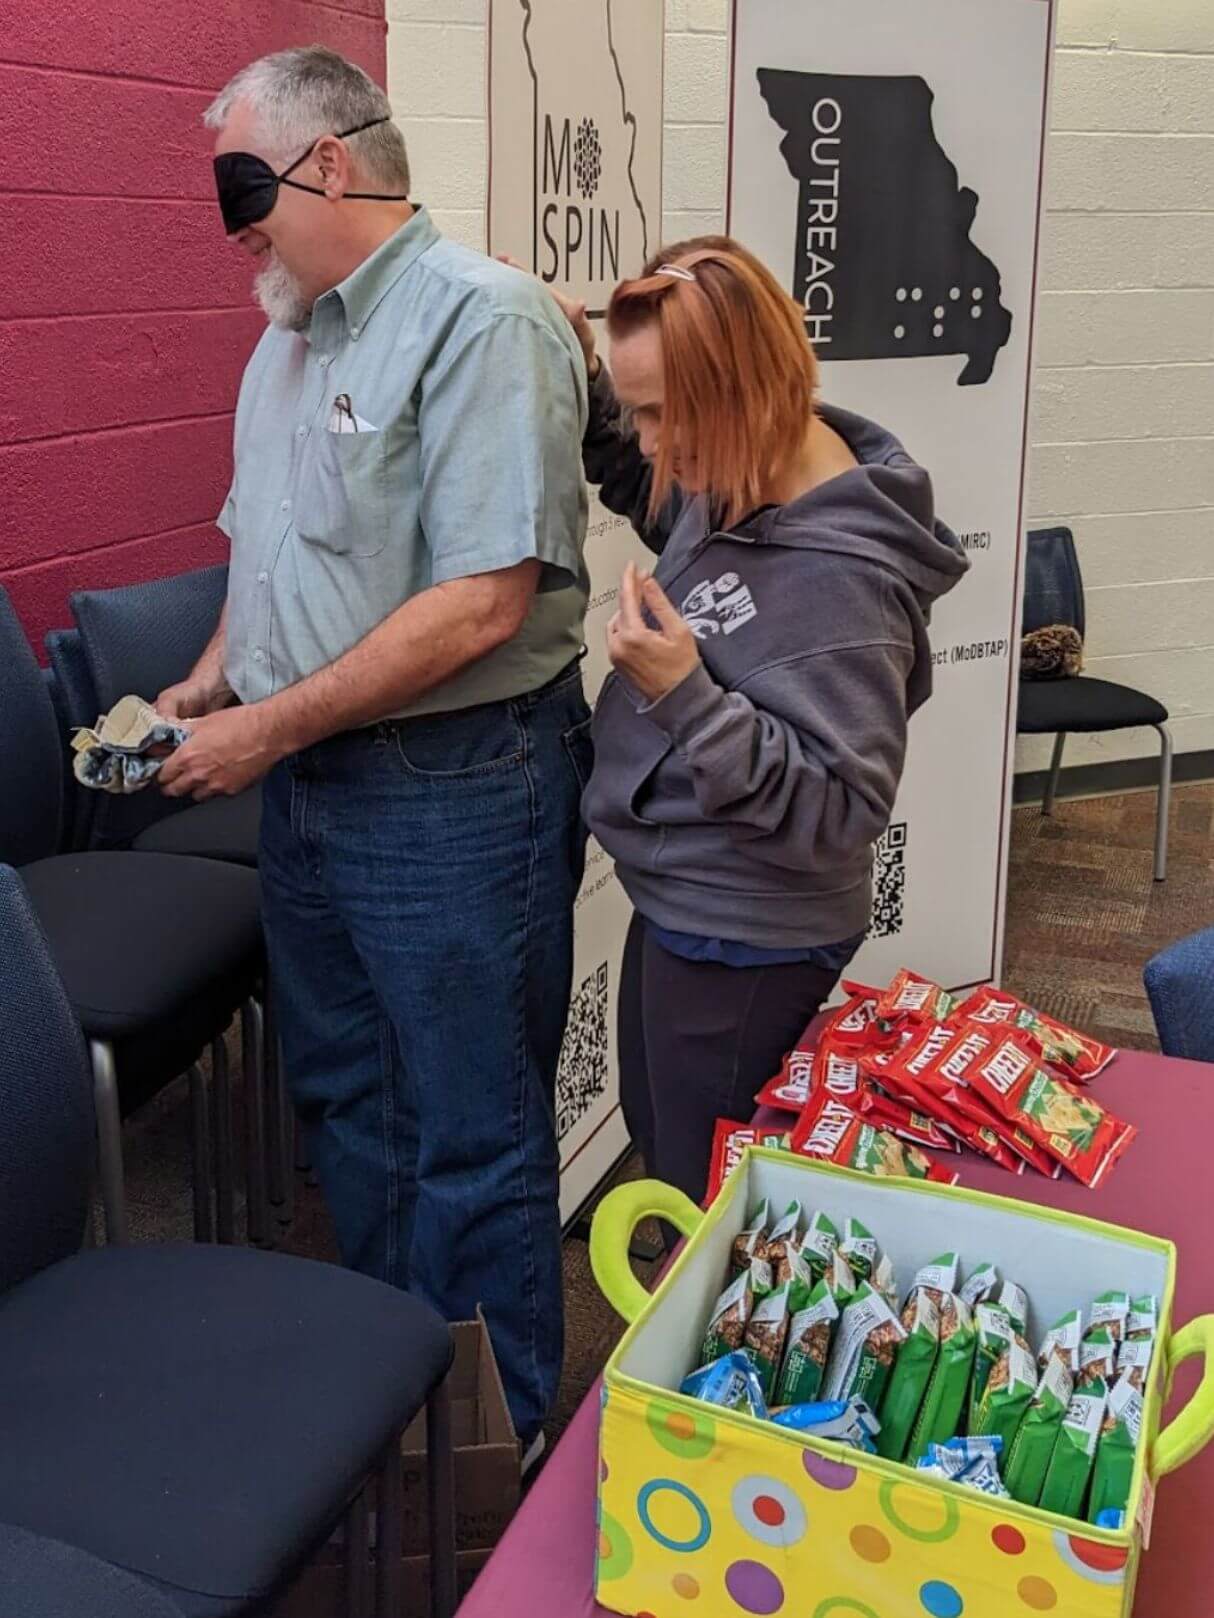 Two participants are involved in searching and finding for an object using haptic signals. In the foreground there are boxes of snacks, and in the background two tall signs explaining the MO DeafBlind Project are on display.